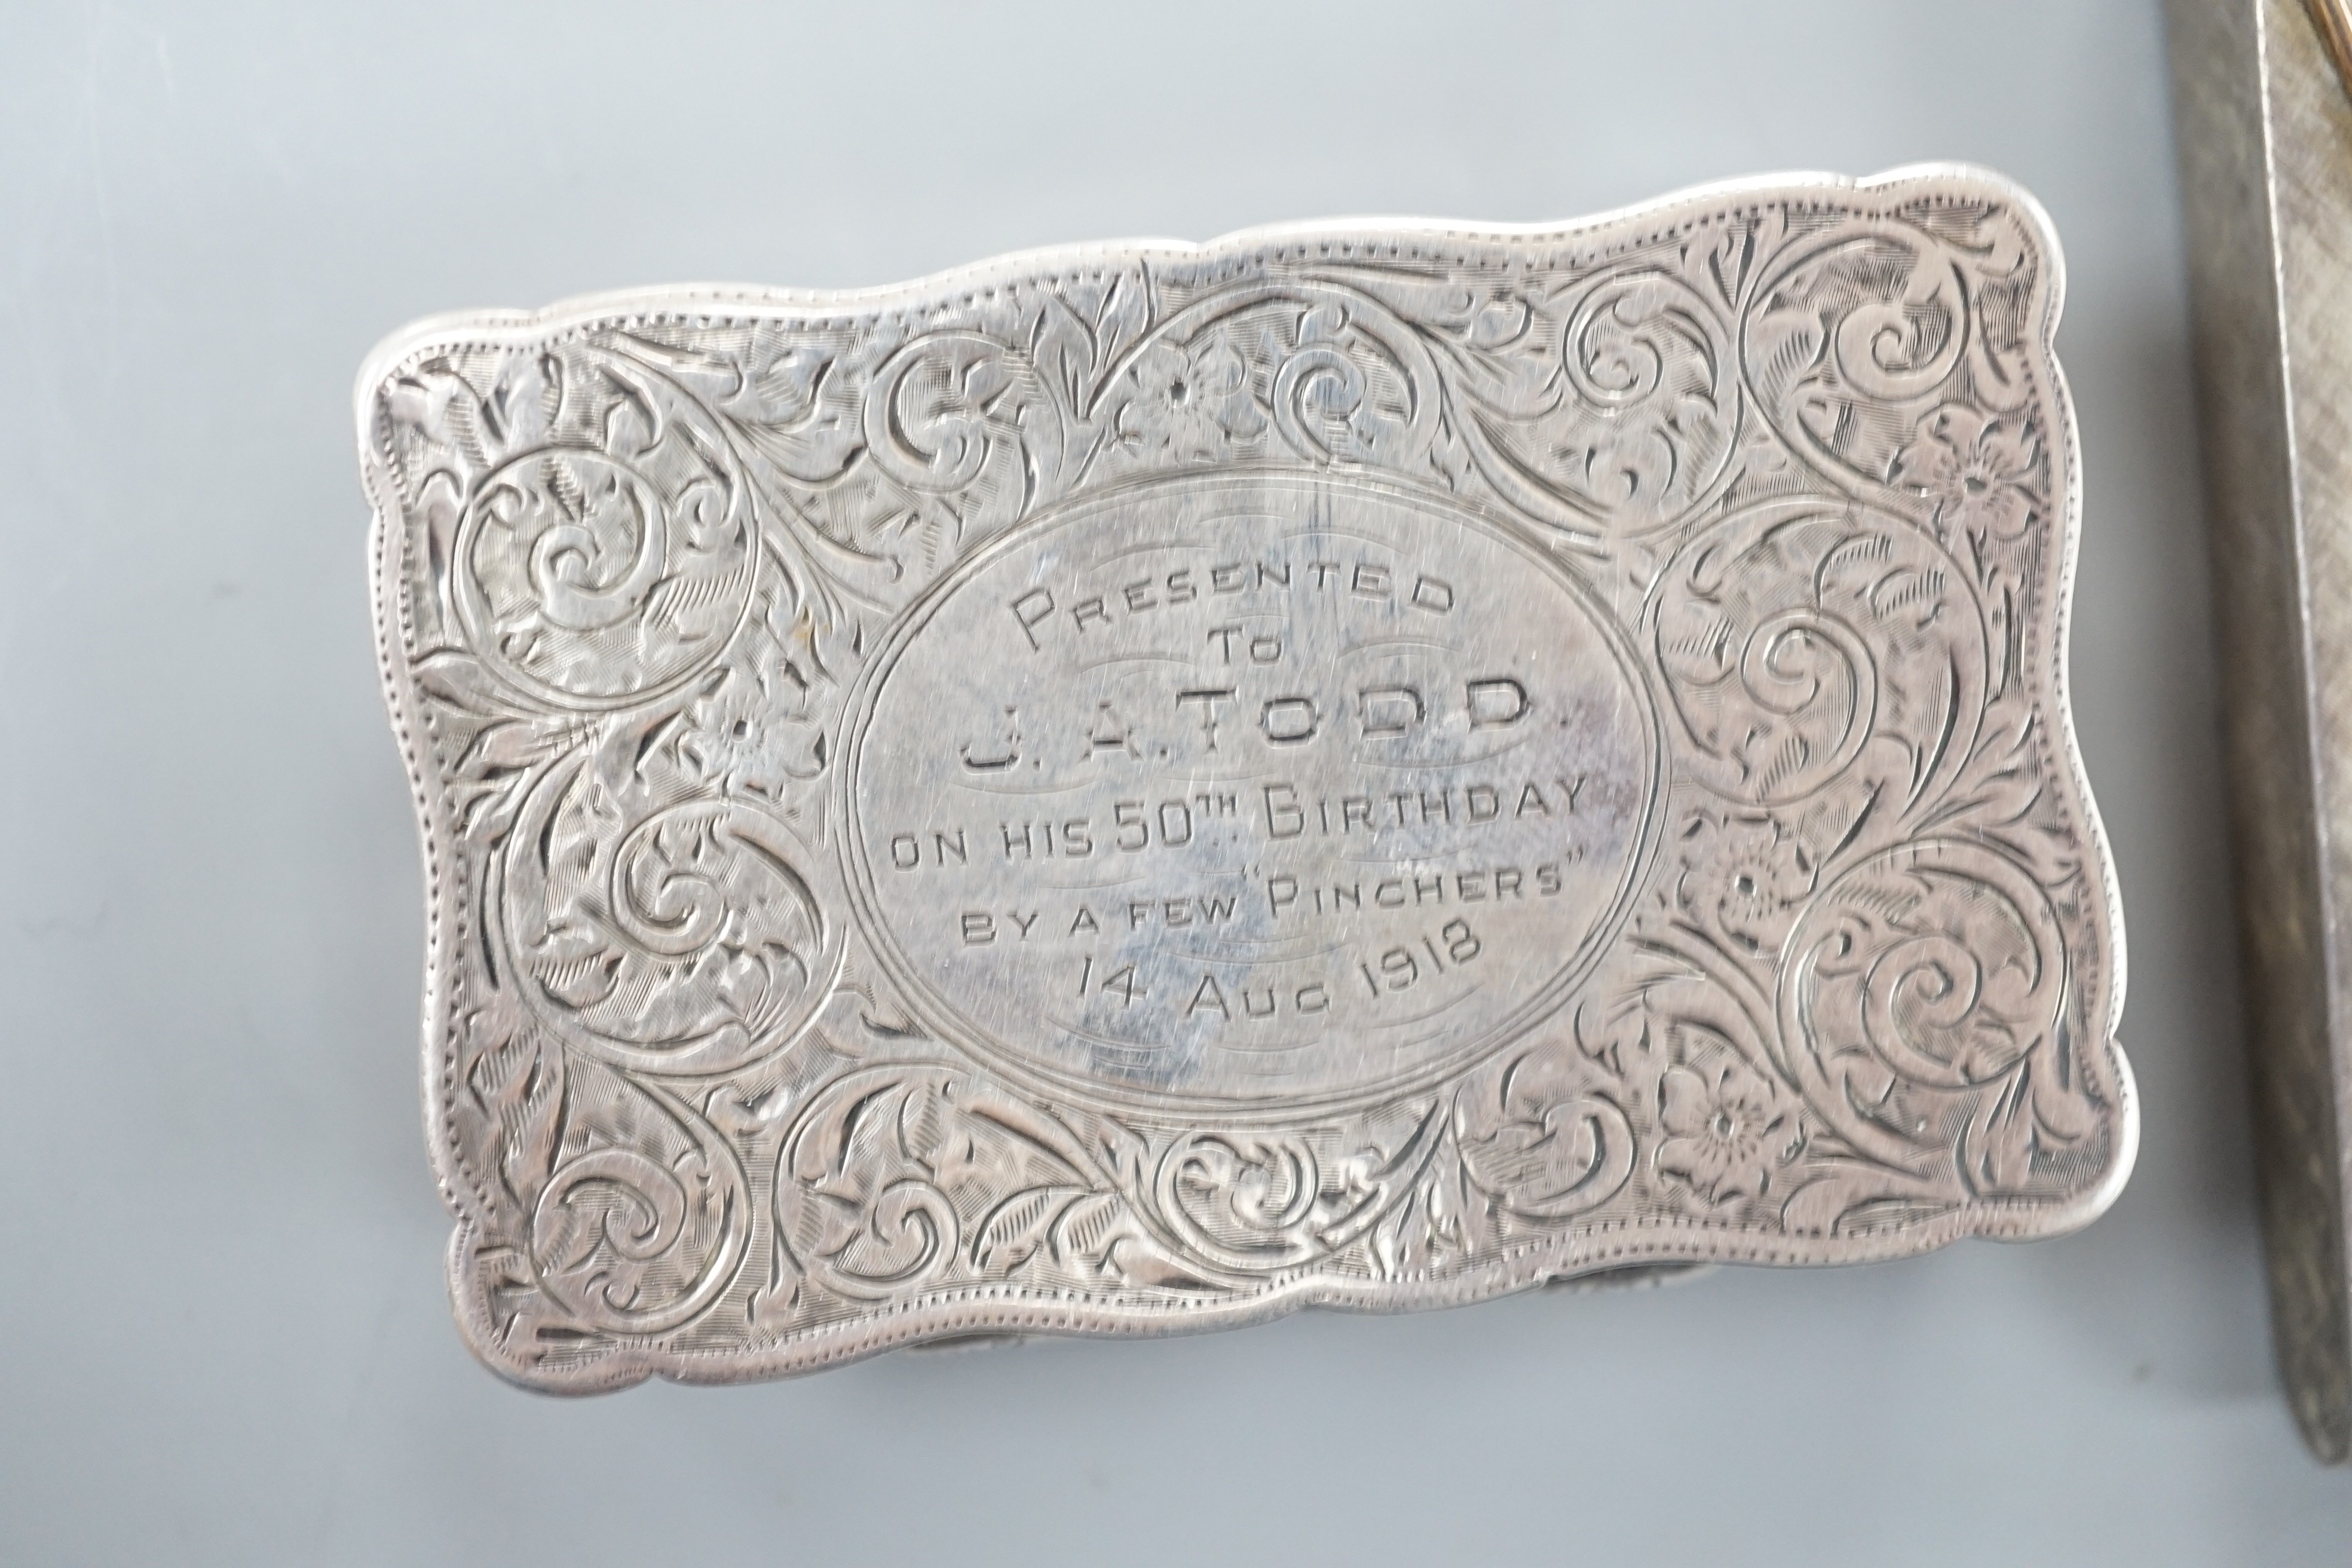 A George V engraved silver snuff box, Joseph Gloster Ltd, Birmingham, 1913, 71mm, with engraved inscription, together with and Italian brushed 925 and 750 cigarette case.